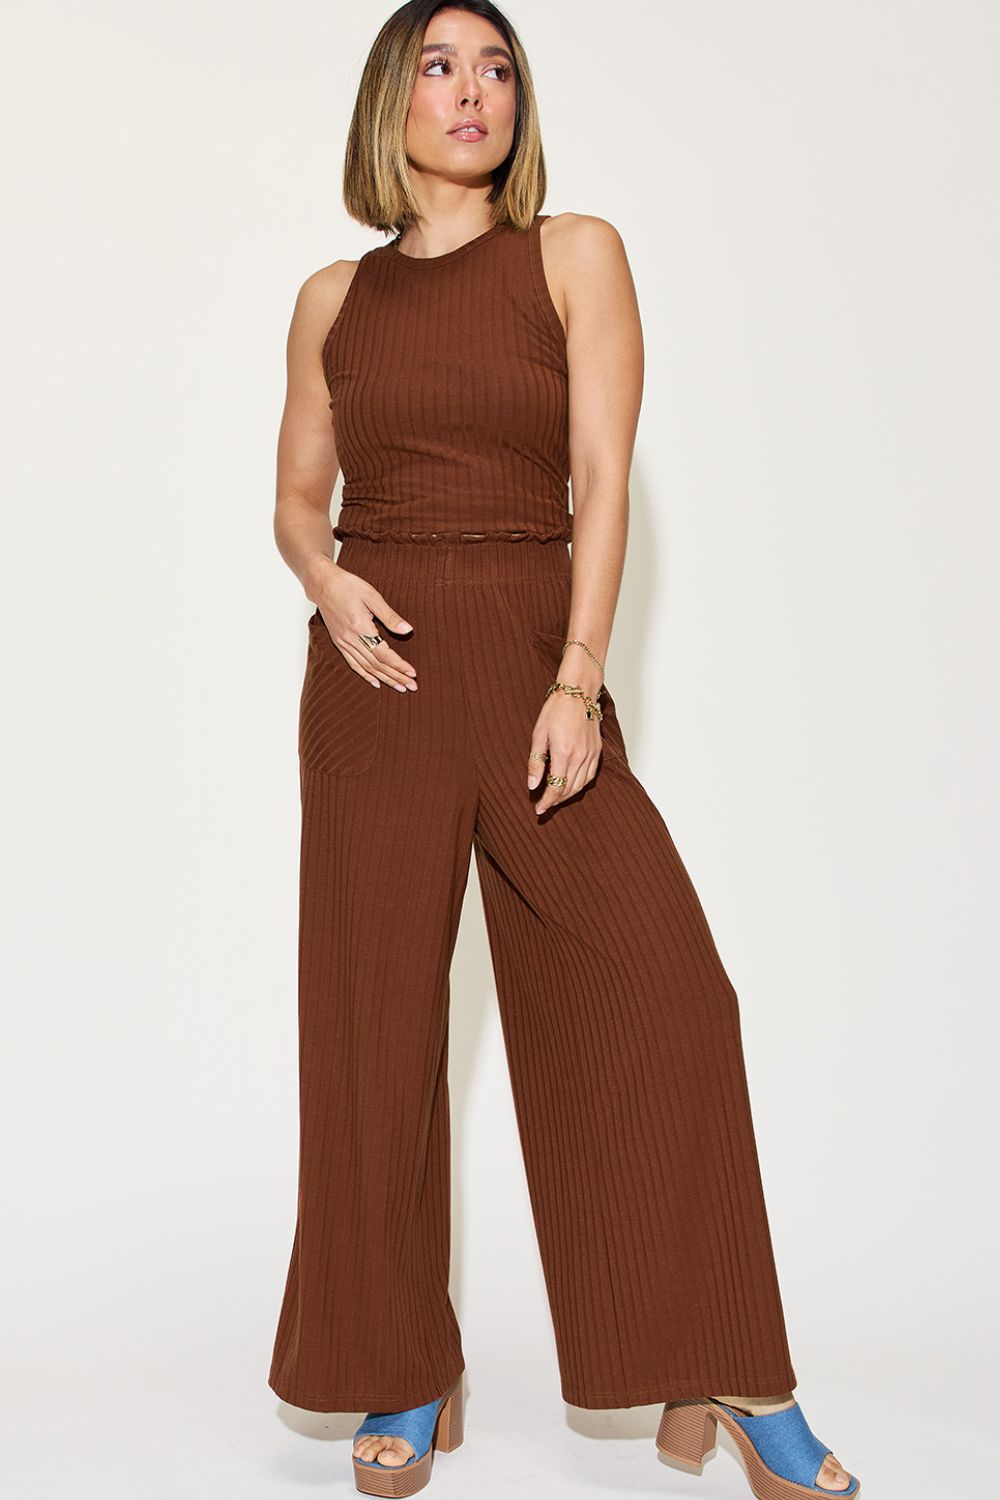 Ribbed Tank and Wide Leg Pants Set - EMMY